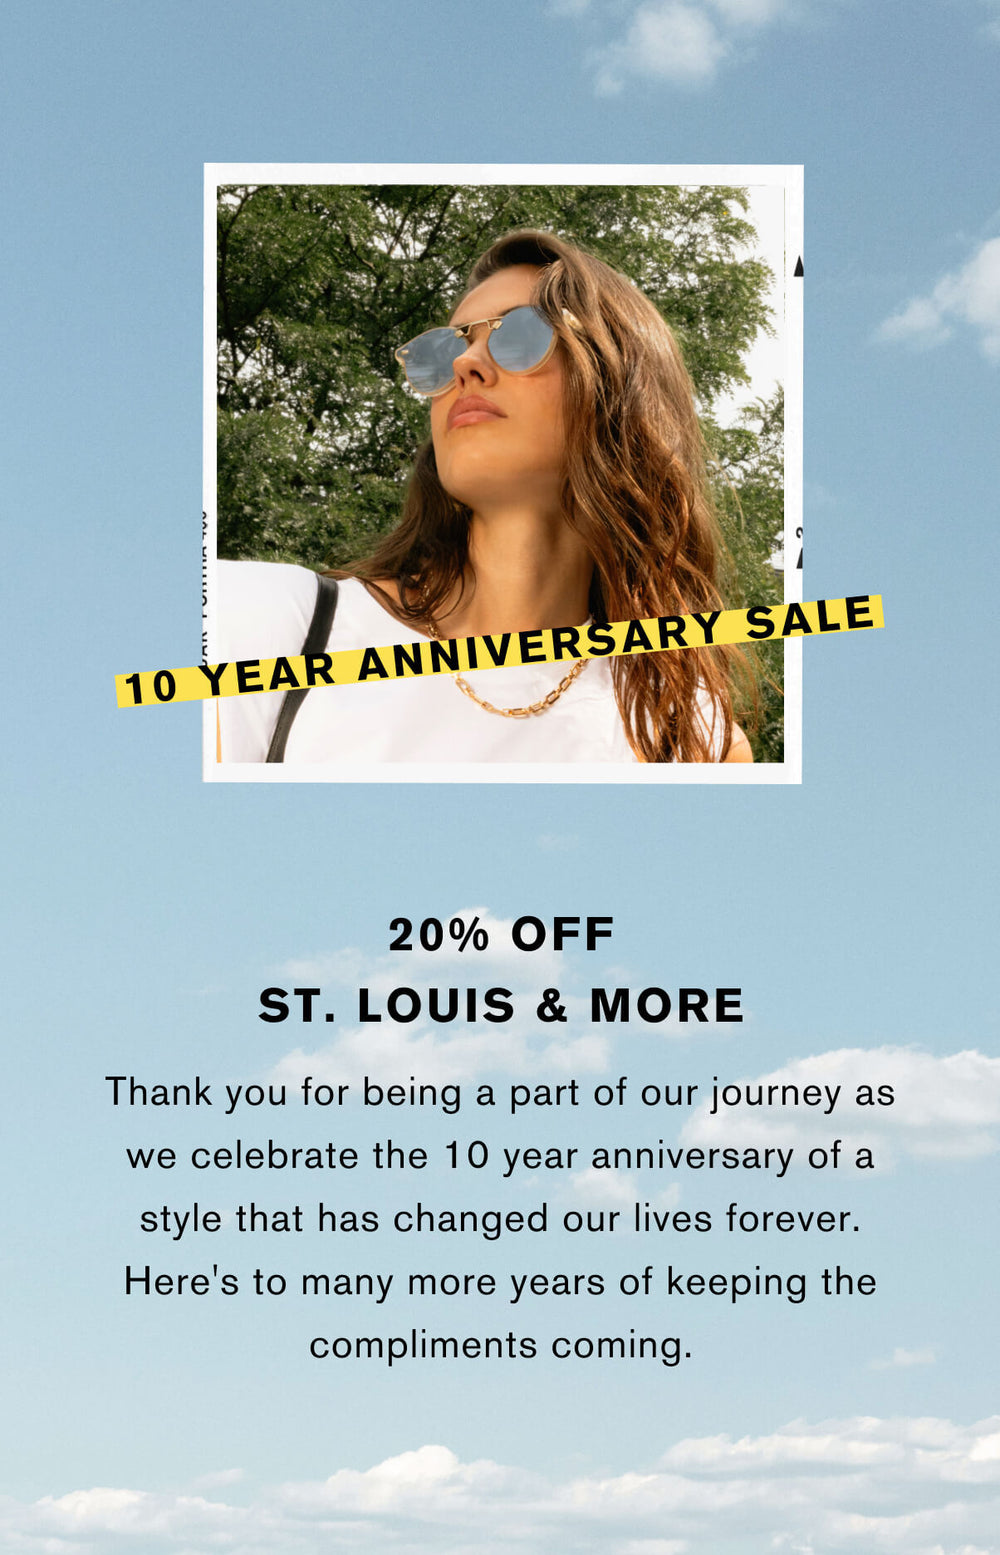 20% off St. Louis & more  Thank you for being part of our journey as we celebrate the 10 year anniversary of a style that has changed our lives forever. Here's to many more years of keeping the compliments coming!